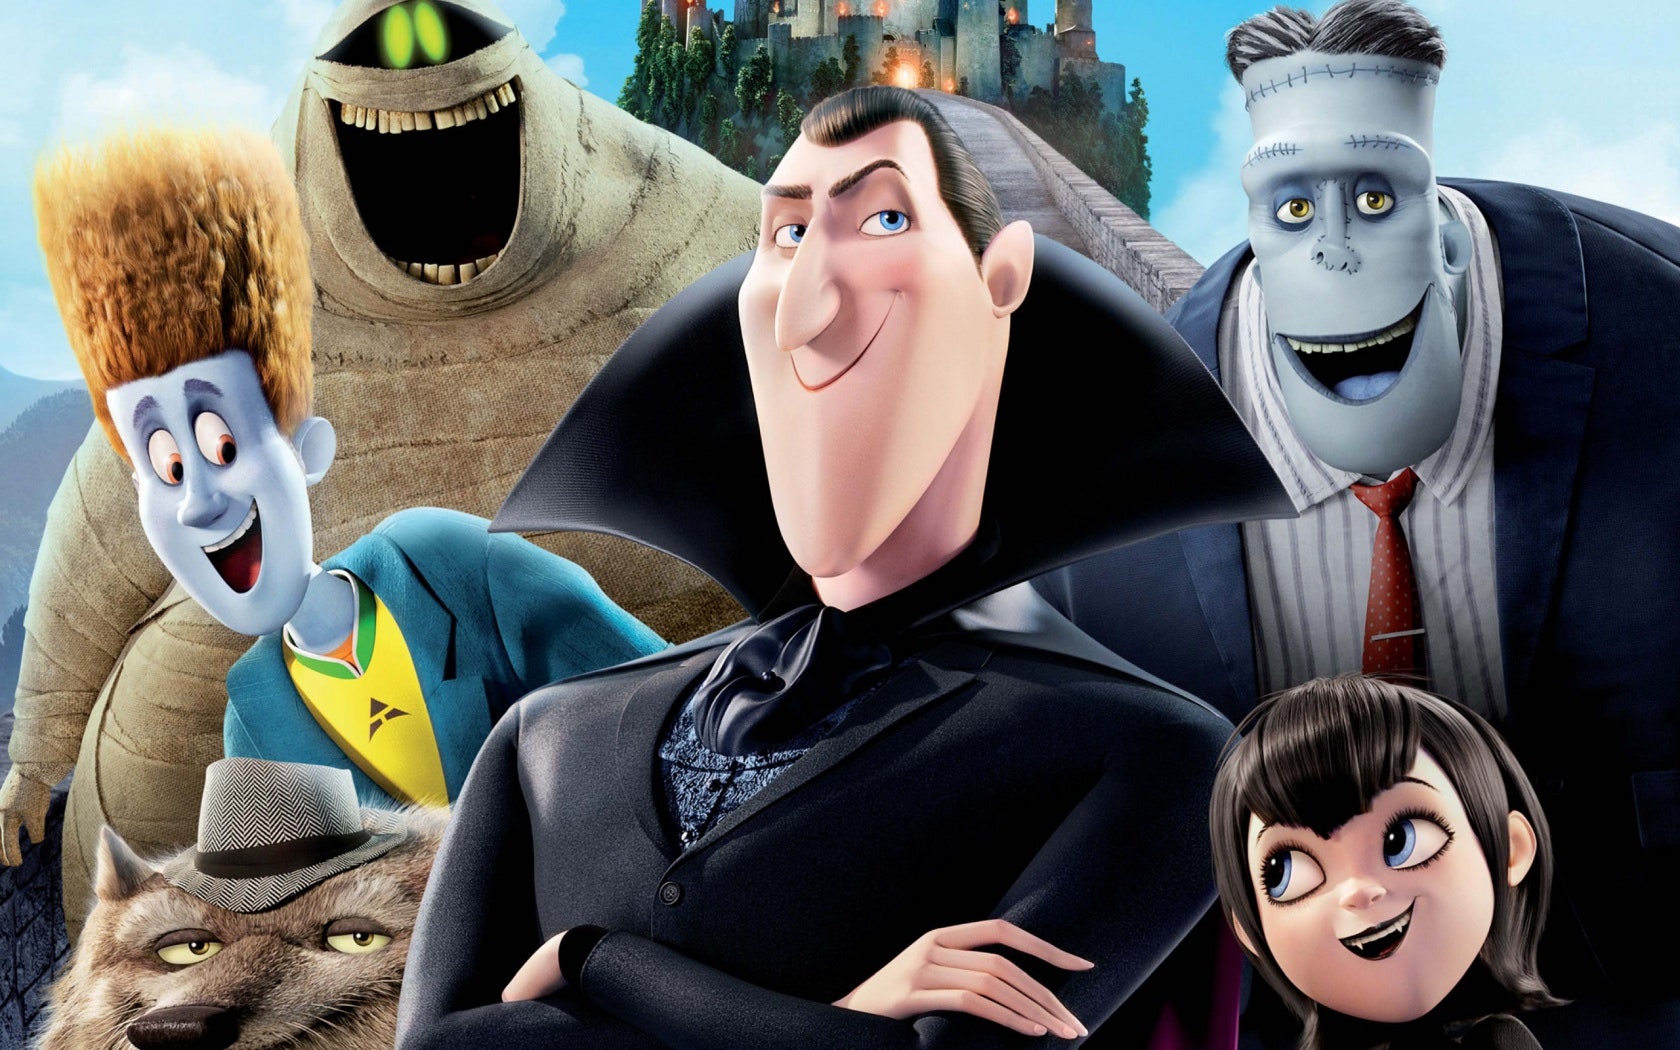 Trailer of Hotel Transylvania 4: release date July 23, 2021 in theatres - What Can I Watch Hotel Transylvania 4 On